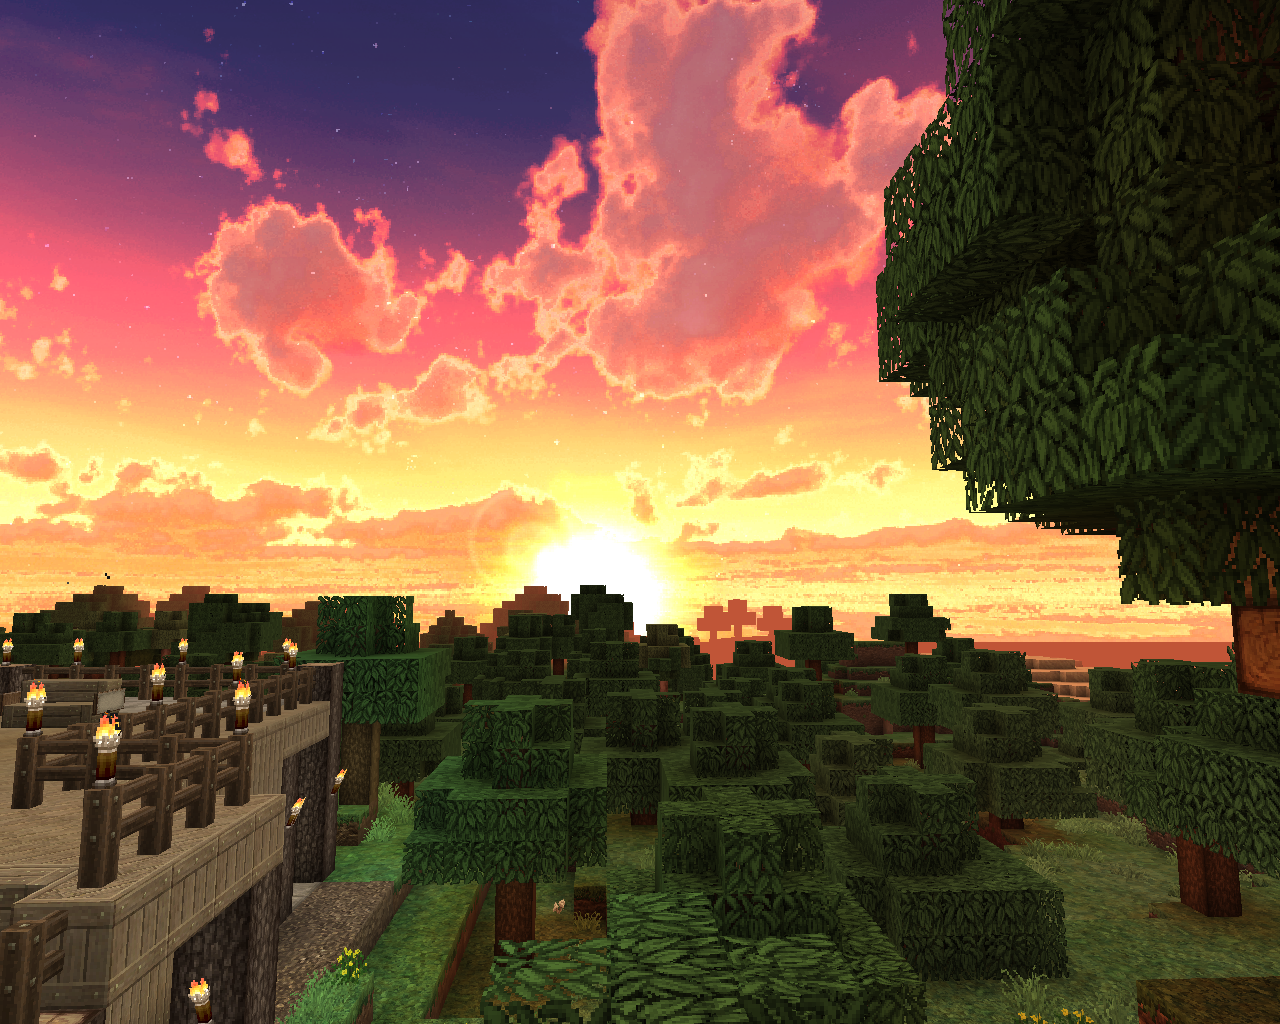 A sunset over the tops of trees in minecraft.